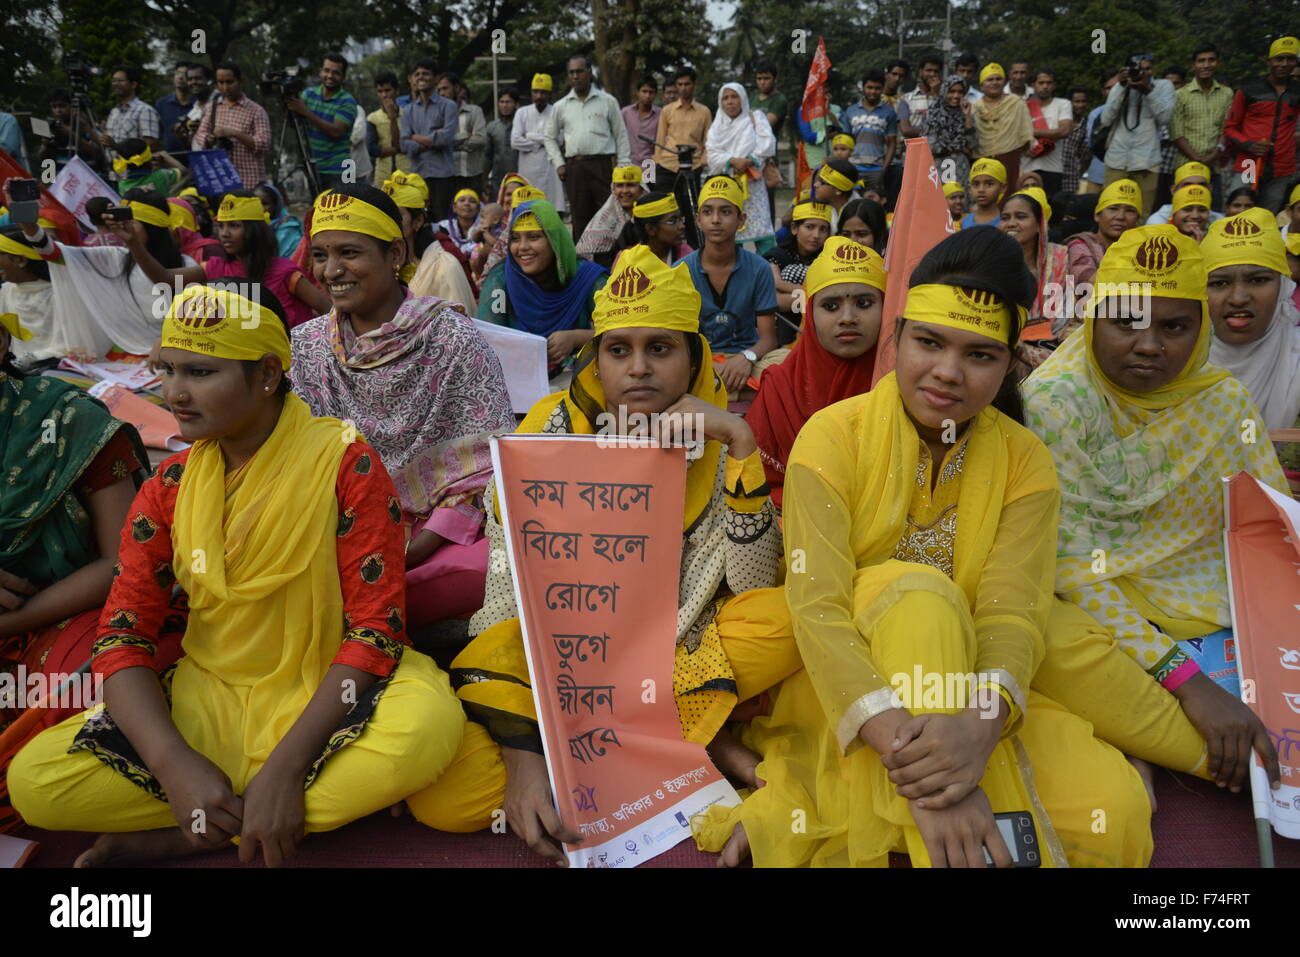 Dhaka, Bangladesh. 25th Nov, 2015. Bangladeshi Women participates Rights activists made protest in front of Central Shohid Minar Dhaka demanding elimination of violence against women on the occasion of the International Day for the Elimination of Violence against Women in Dhaka, Bangladesh. On November 25, 2015 Rights activists made protest in front of Central Shohid Minar Dhaka demanding elimination of violence against women on the occasion of the International Day for the Elimination of Violence against Women in Dhaka, Bangladesh. Credit:  Mamunur Rashid/Alamy Live News Stock Photo